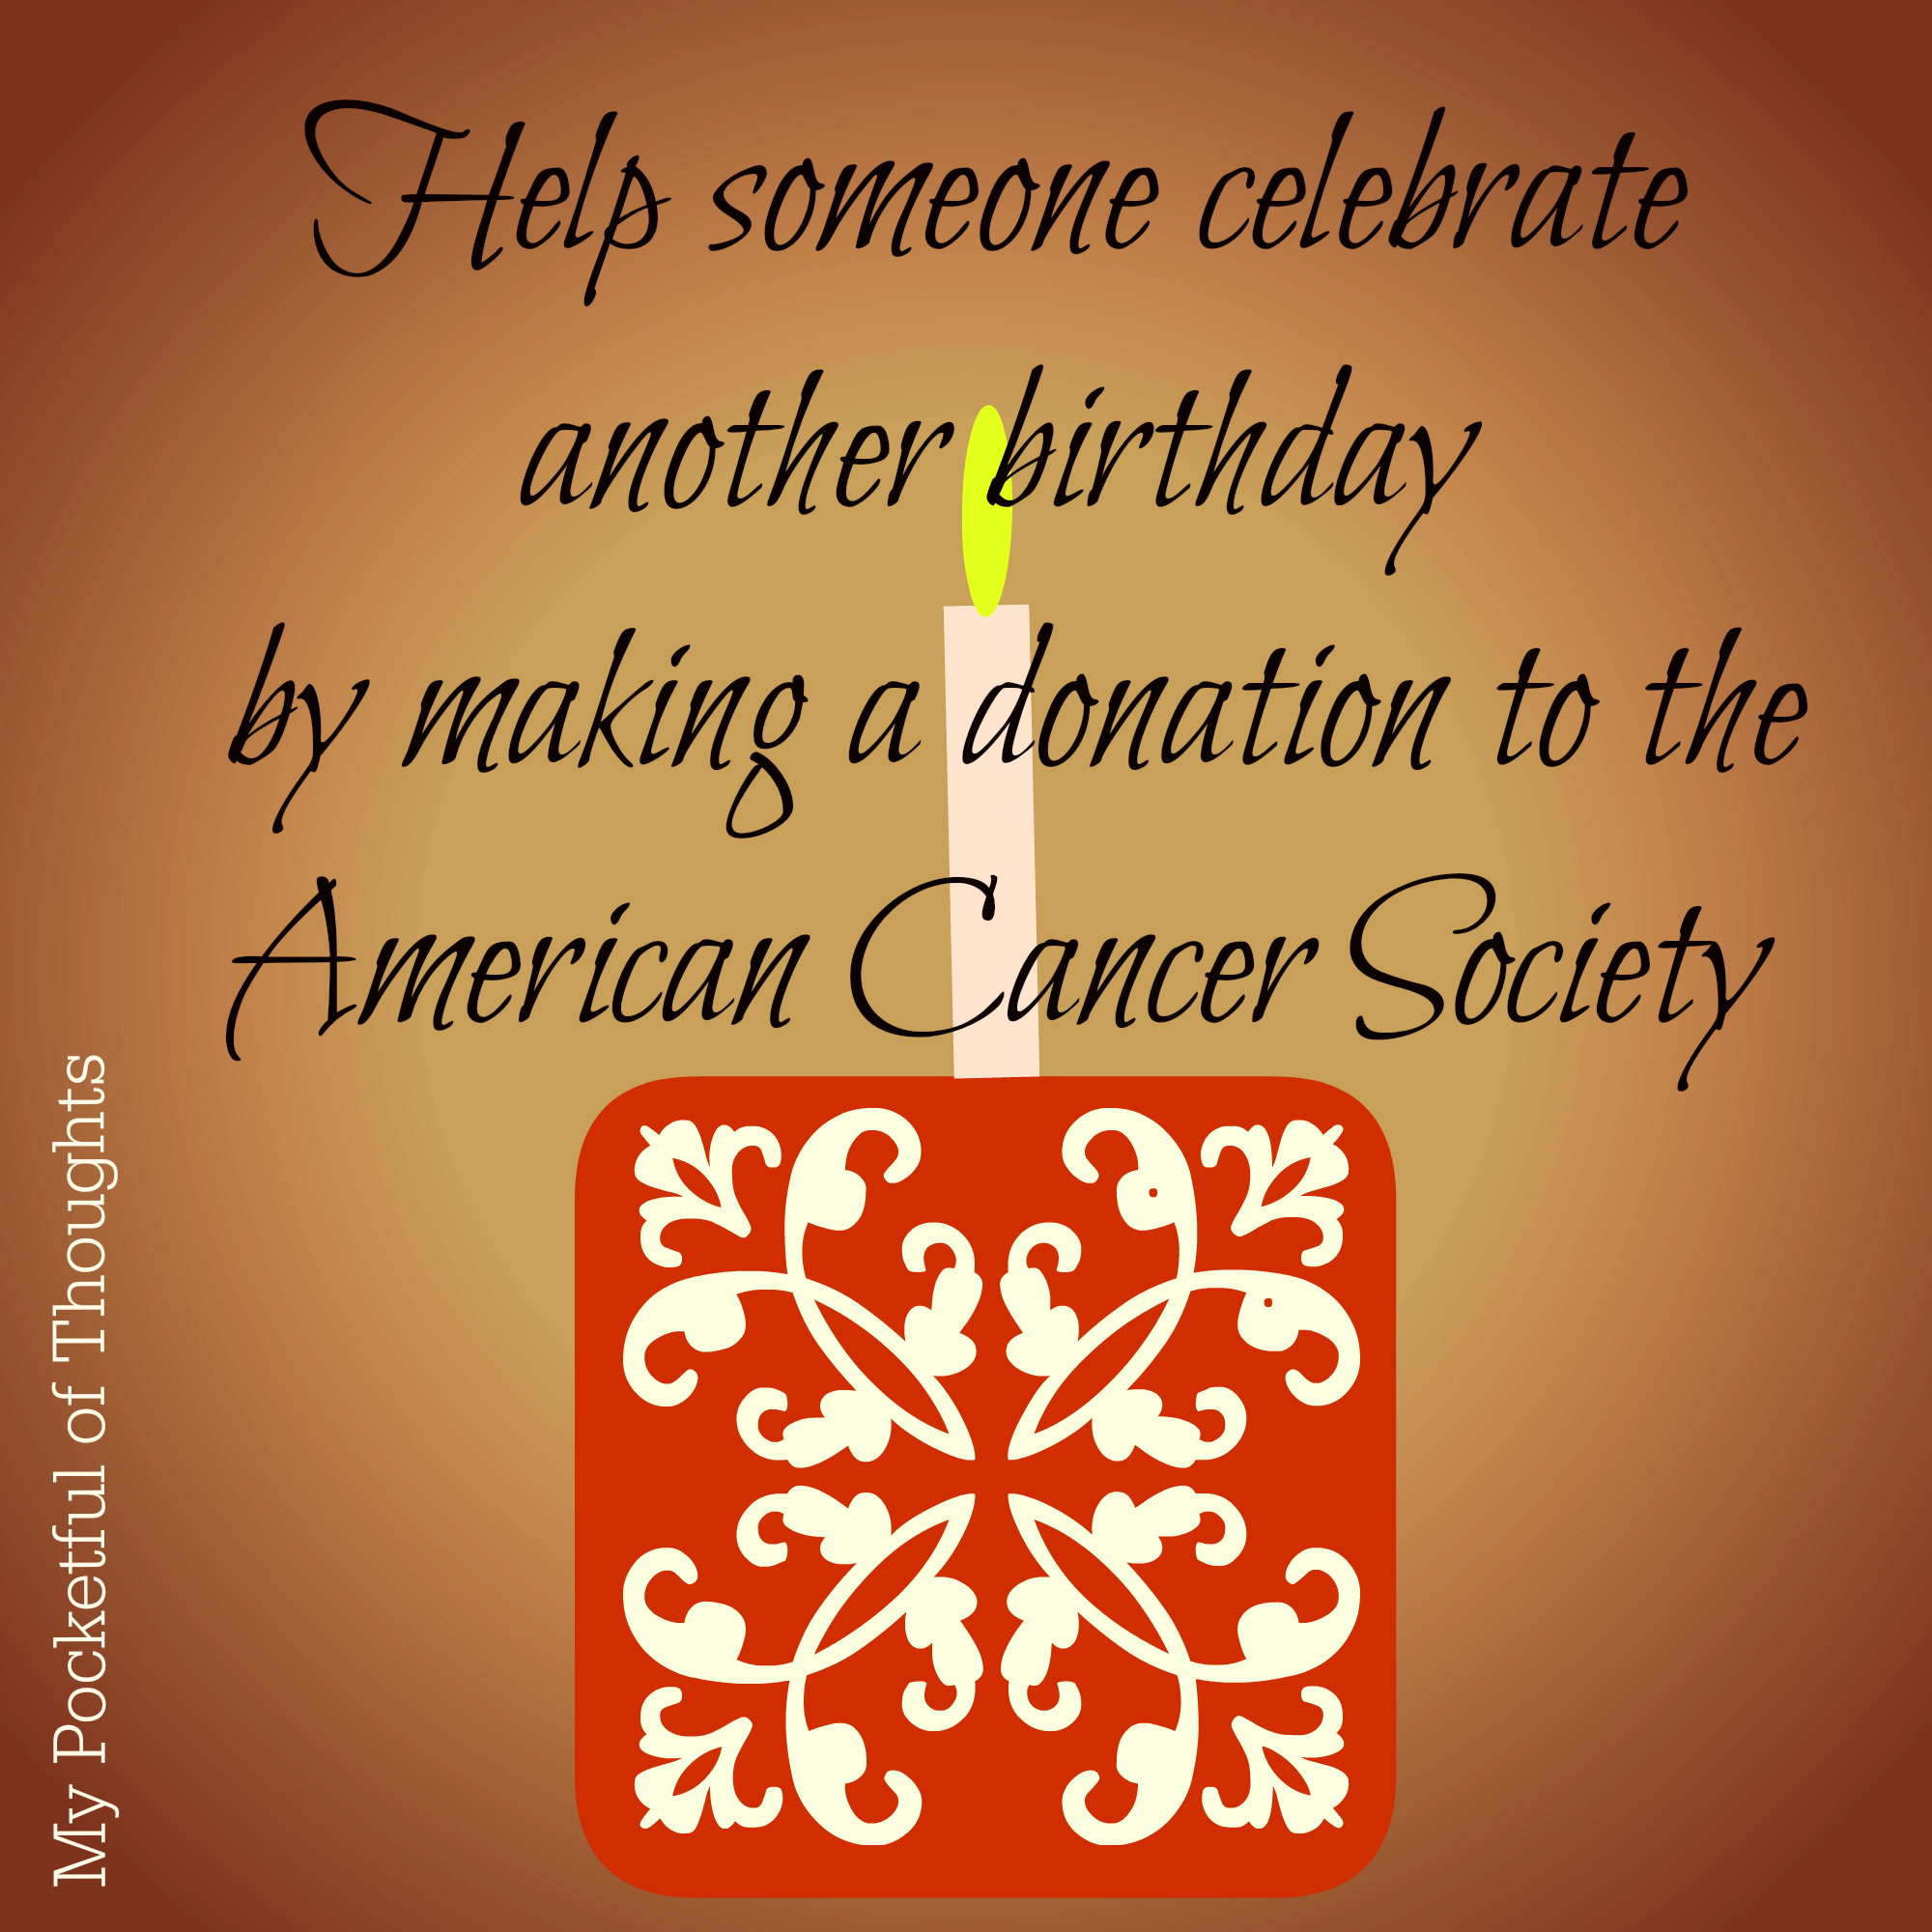 Donate to American Cancer Society!